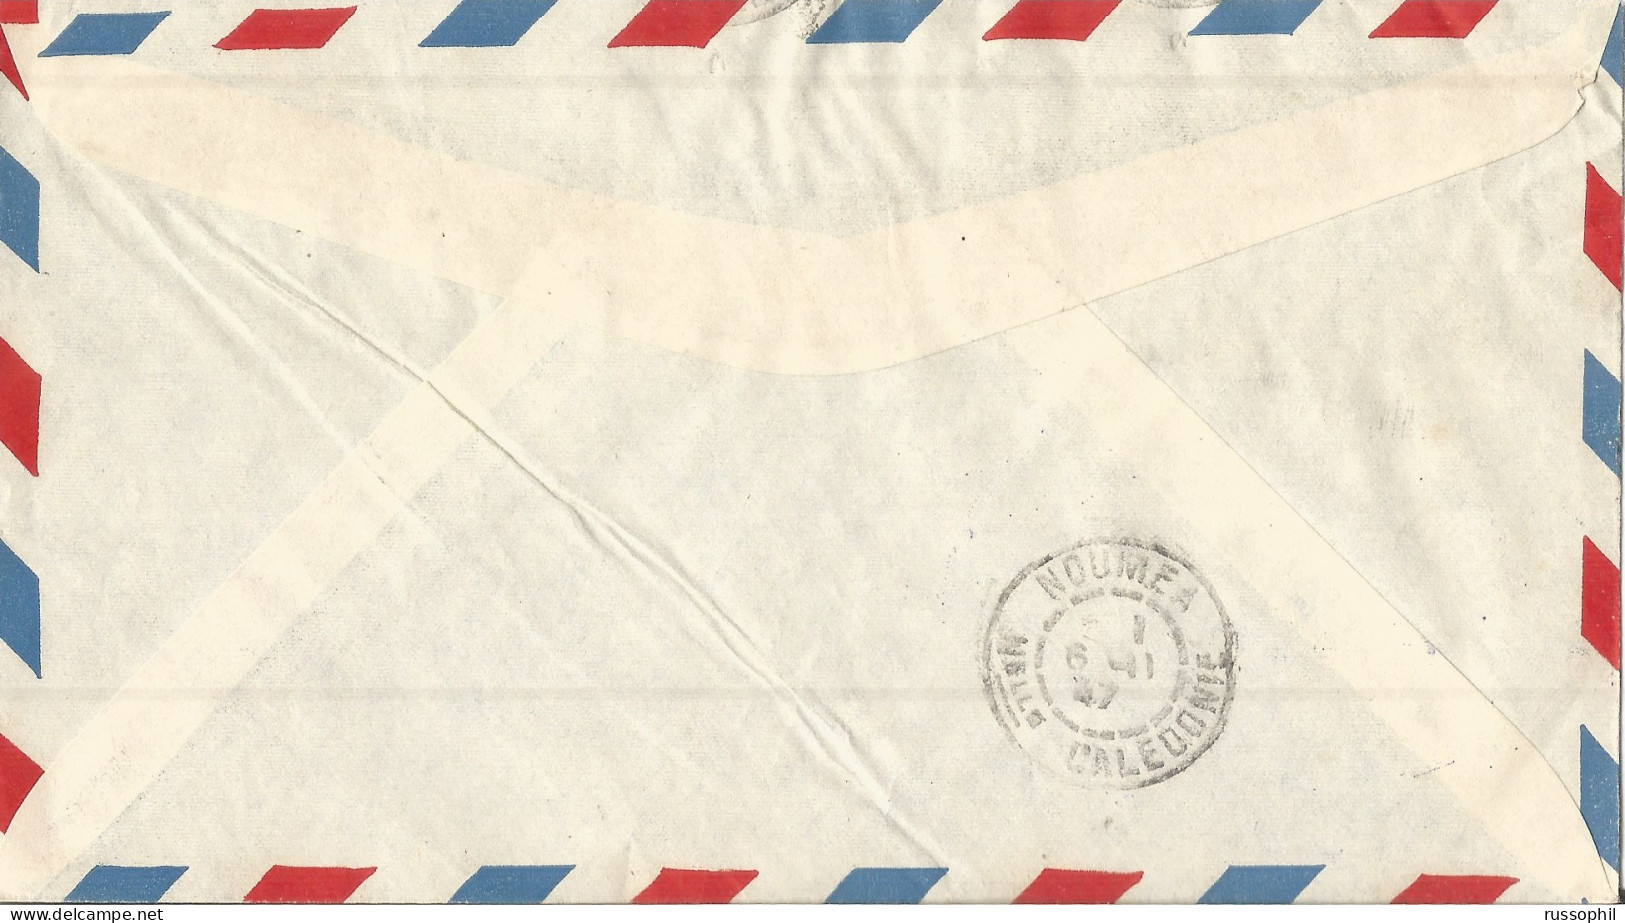 OCEANIE -  TRAPAS - 3 FR. FRANKING ON AIR COVER FROM PAPEETE TO NEW CALEDONIA - RETURNED TO SENDER - 1947 - Lettres & Documents